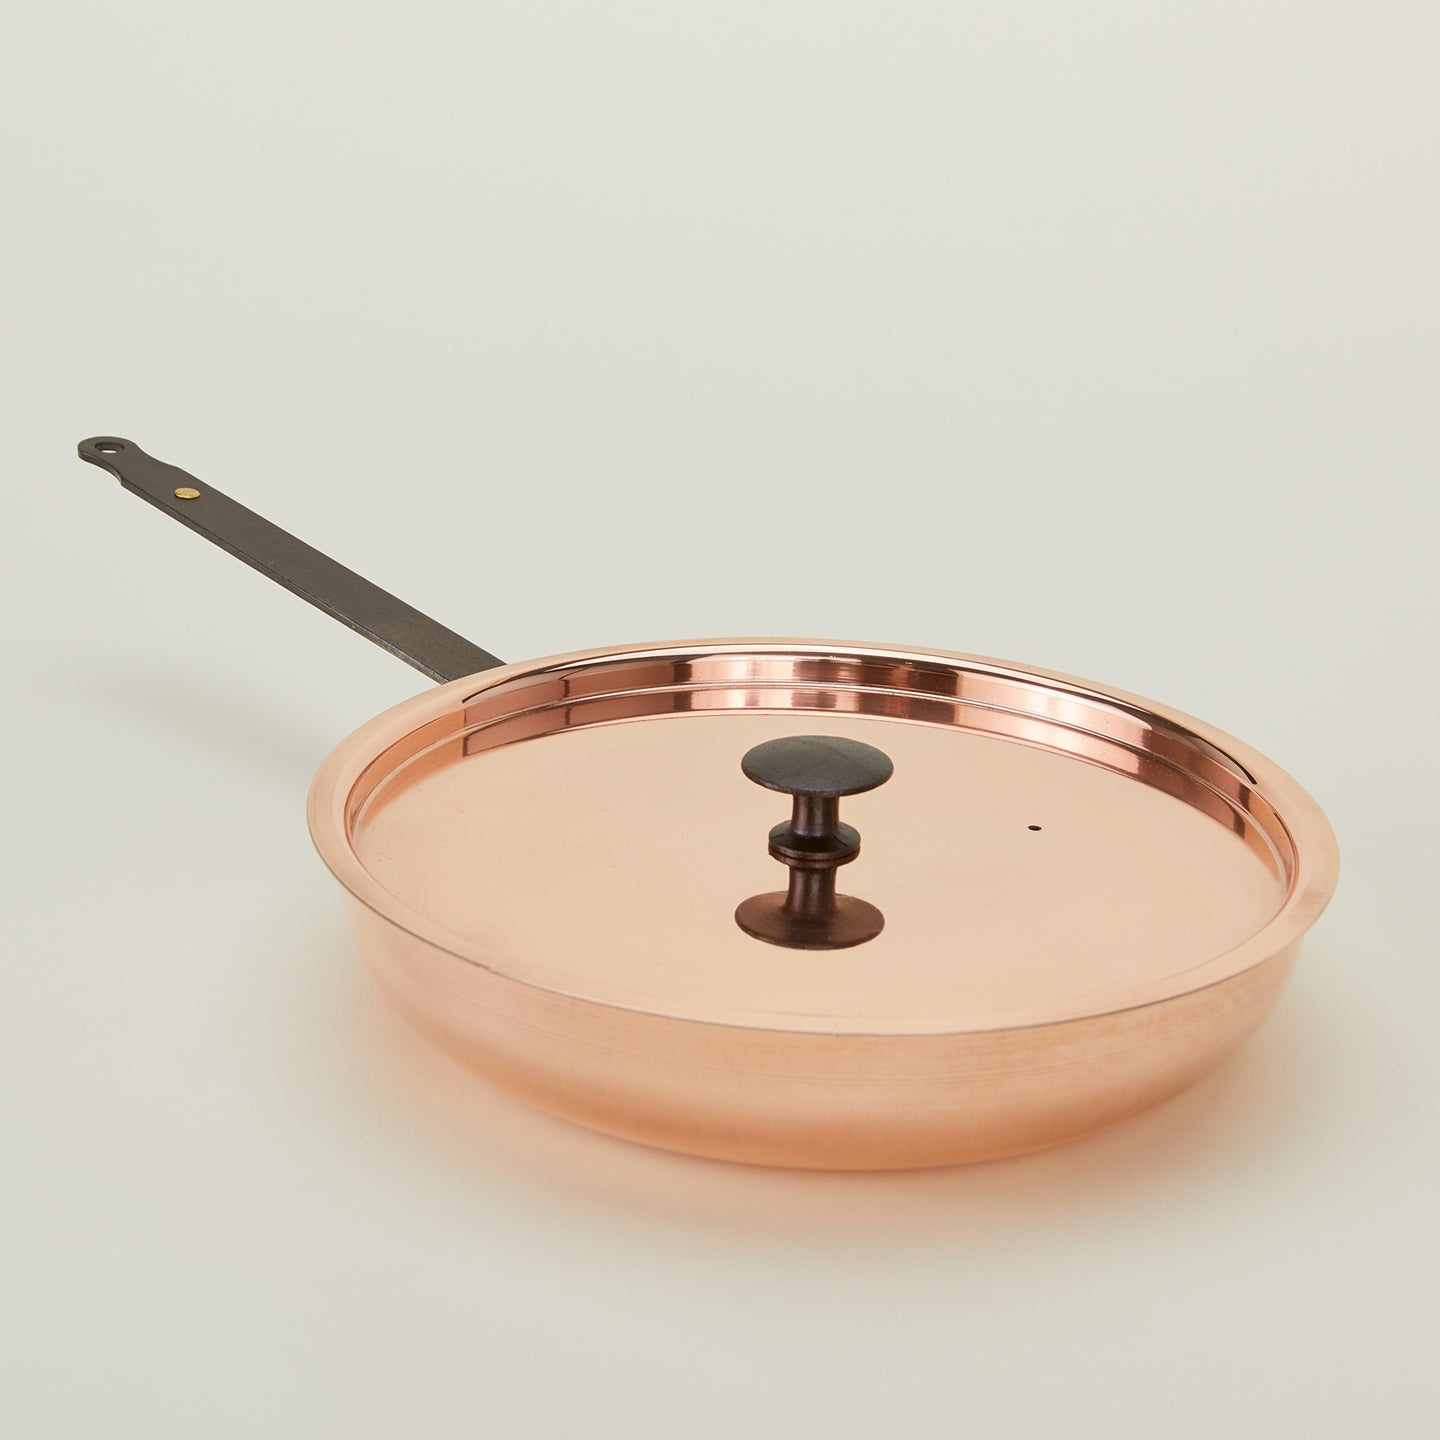 Infinitec - The 3-IN-1 Copper frying pan is the most